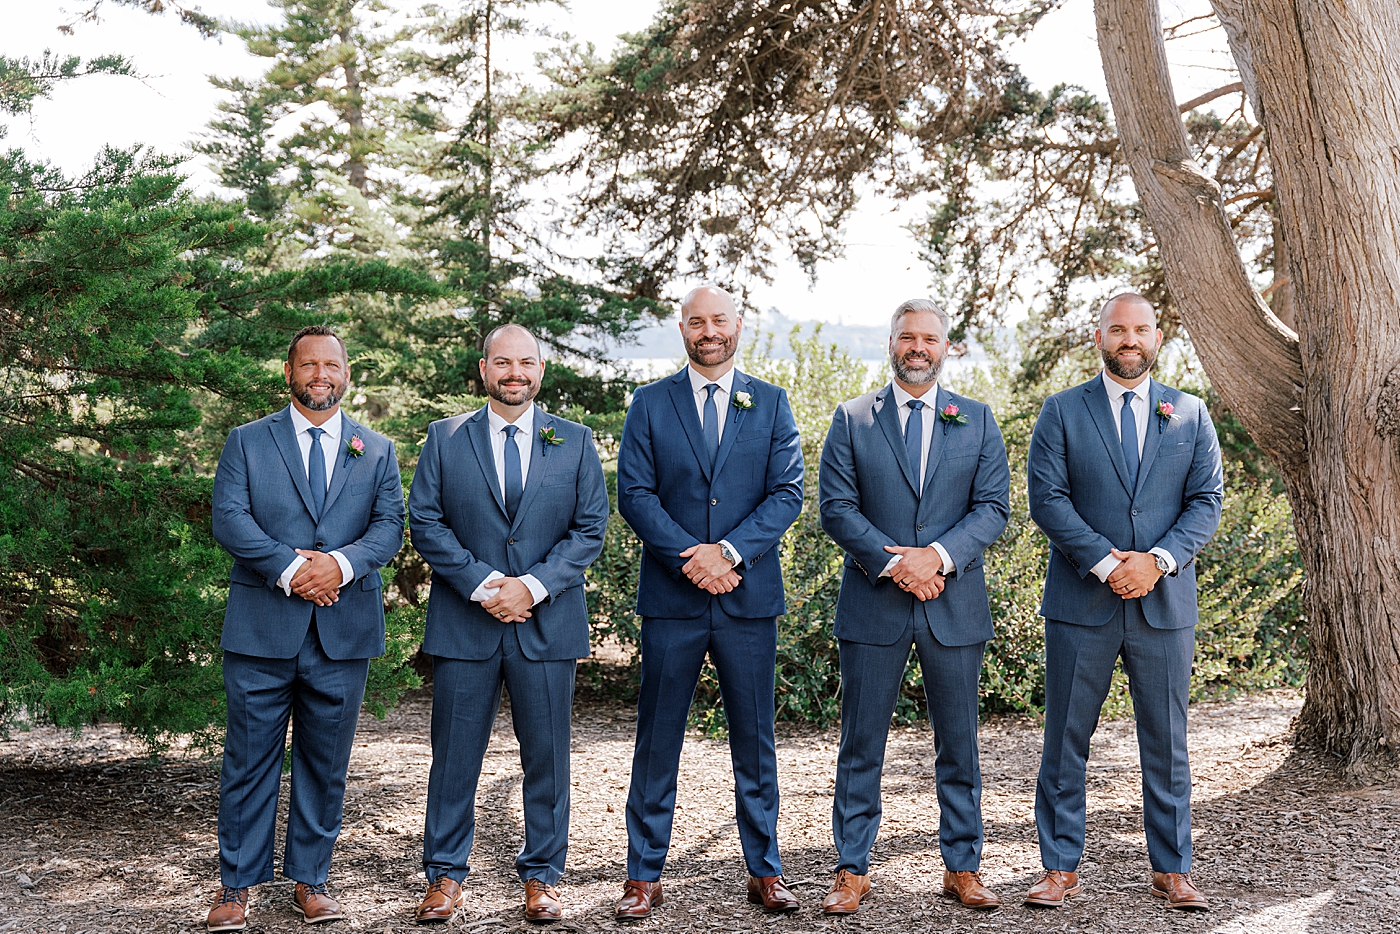 Groom and groomsmen in navy suits lined up side by side smiling at the camera | Image by Hope Helmuth Photography